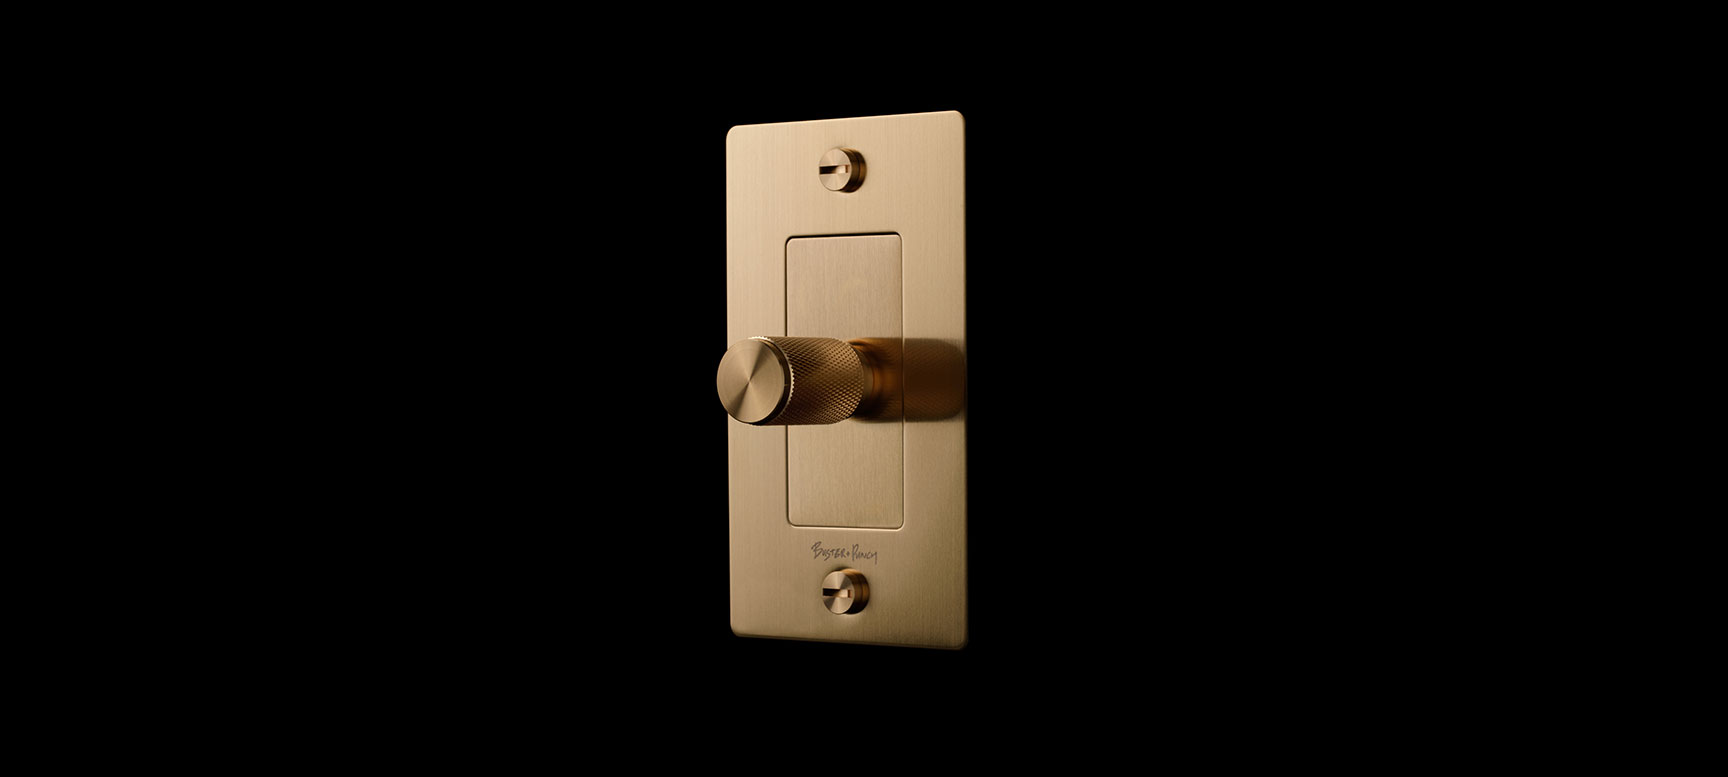 The New Dimmer Switch